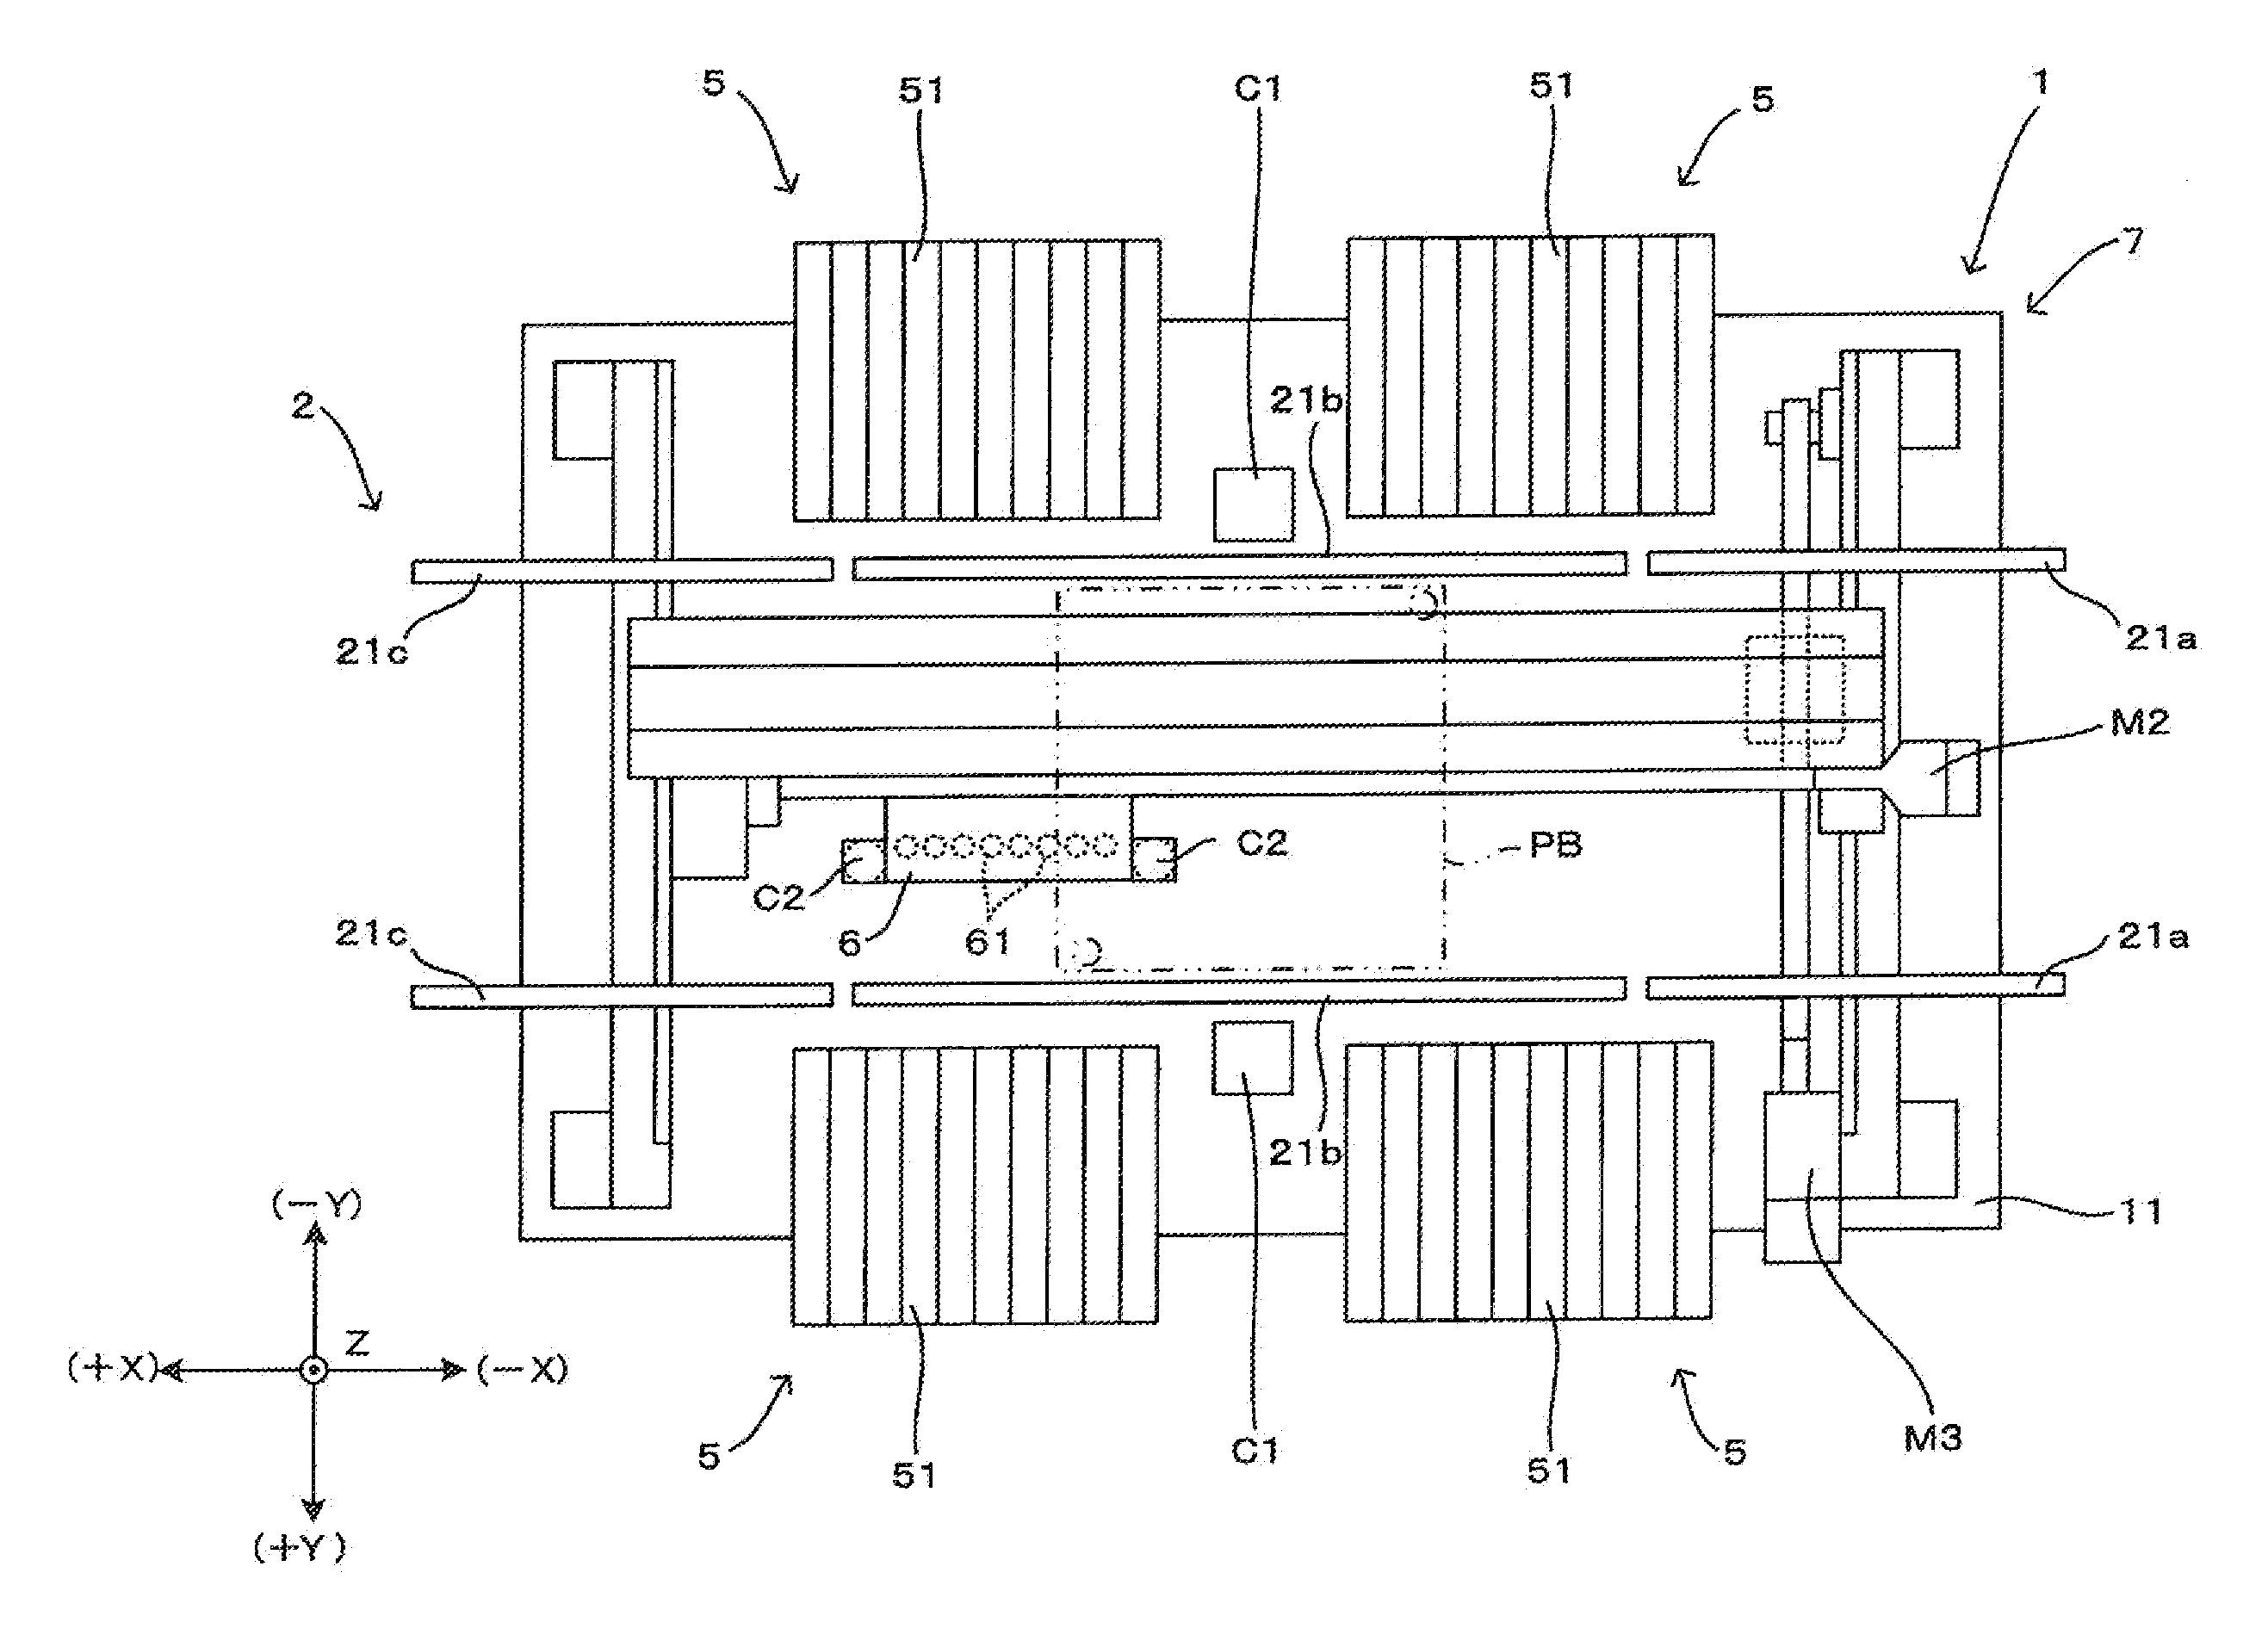 Substrate transfer apparatus